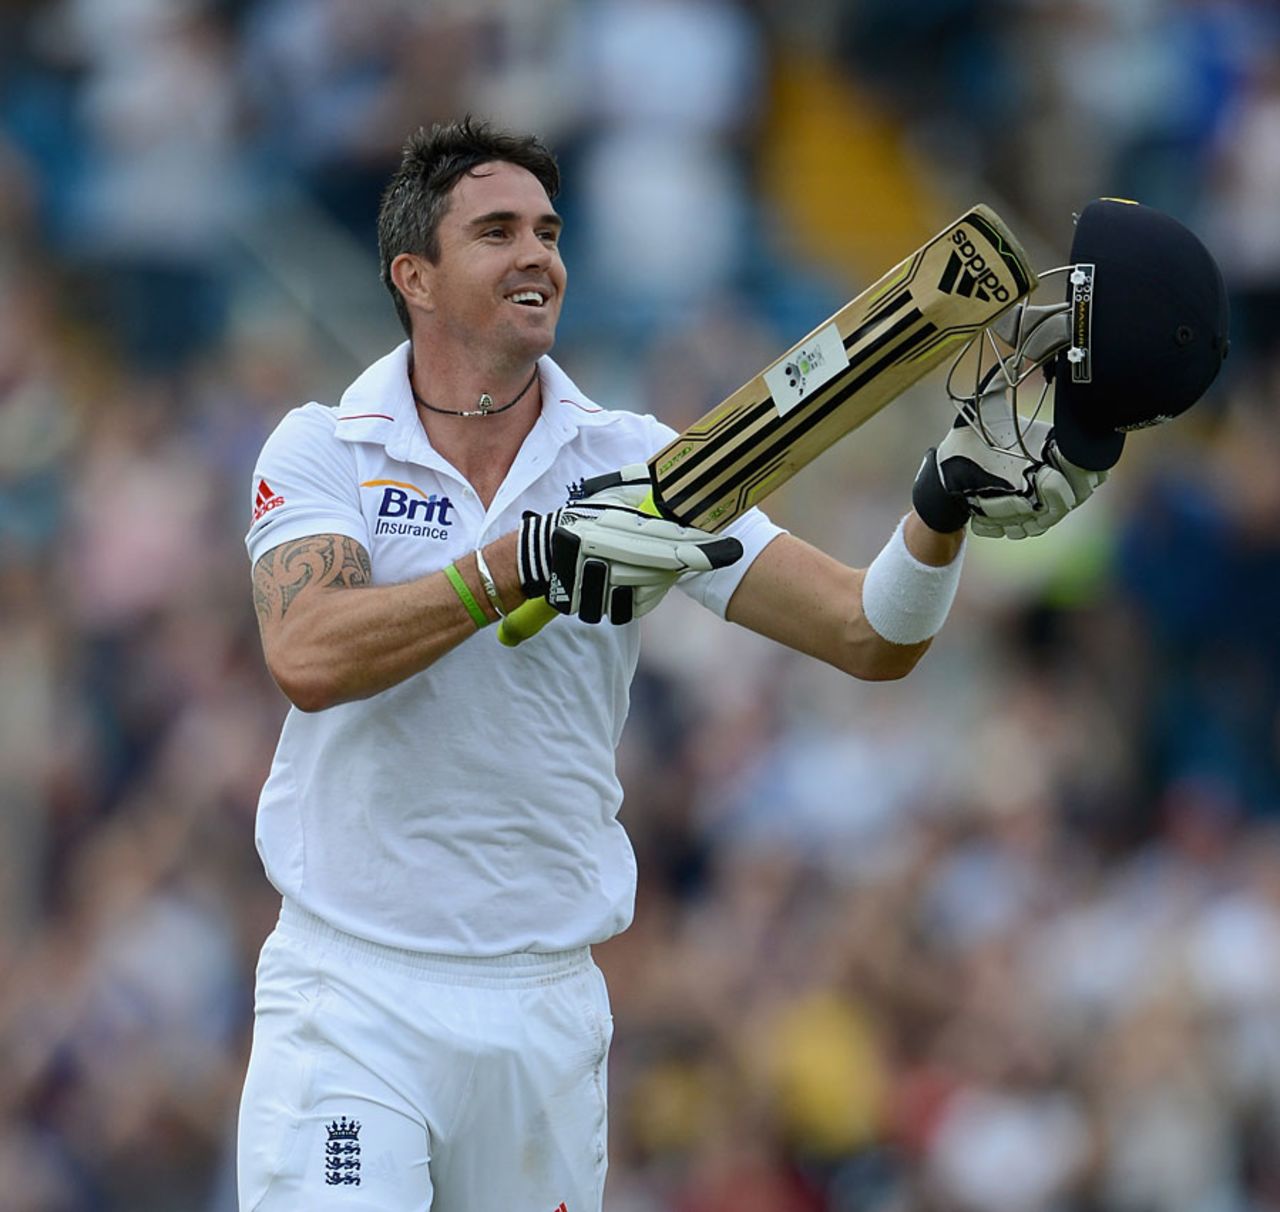 Kevin Pietersen enjoyed his 21st Test century, England v South Africa, 2nd Investec Test, Headingley, 3rd day, August 4, 2012